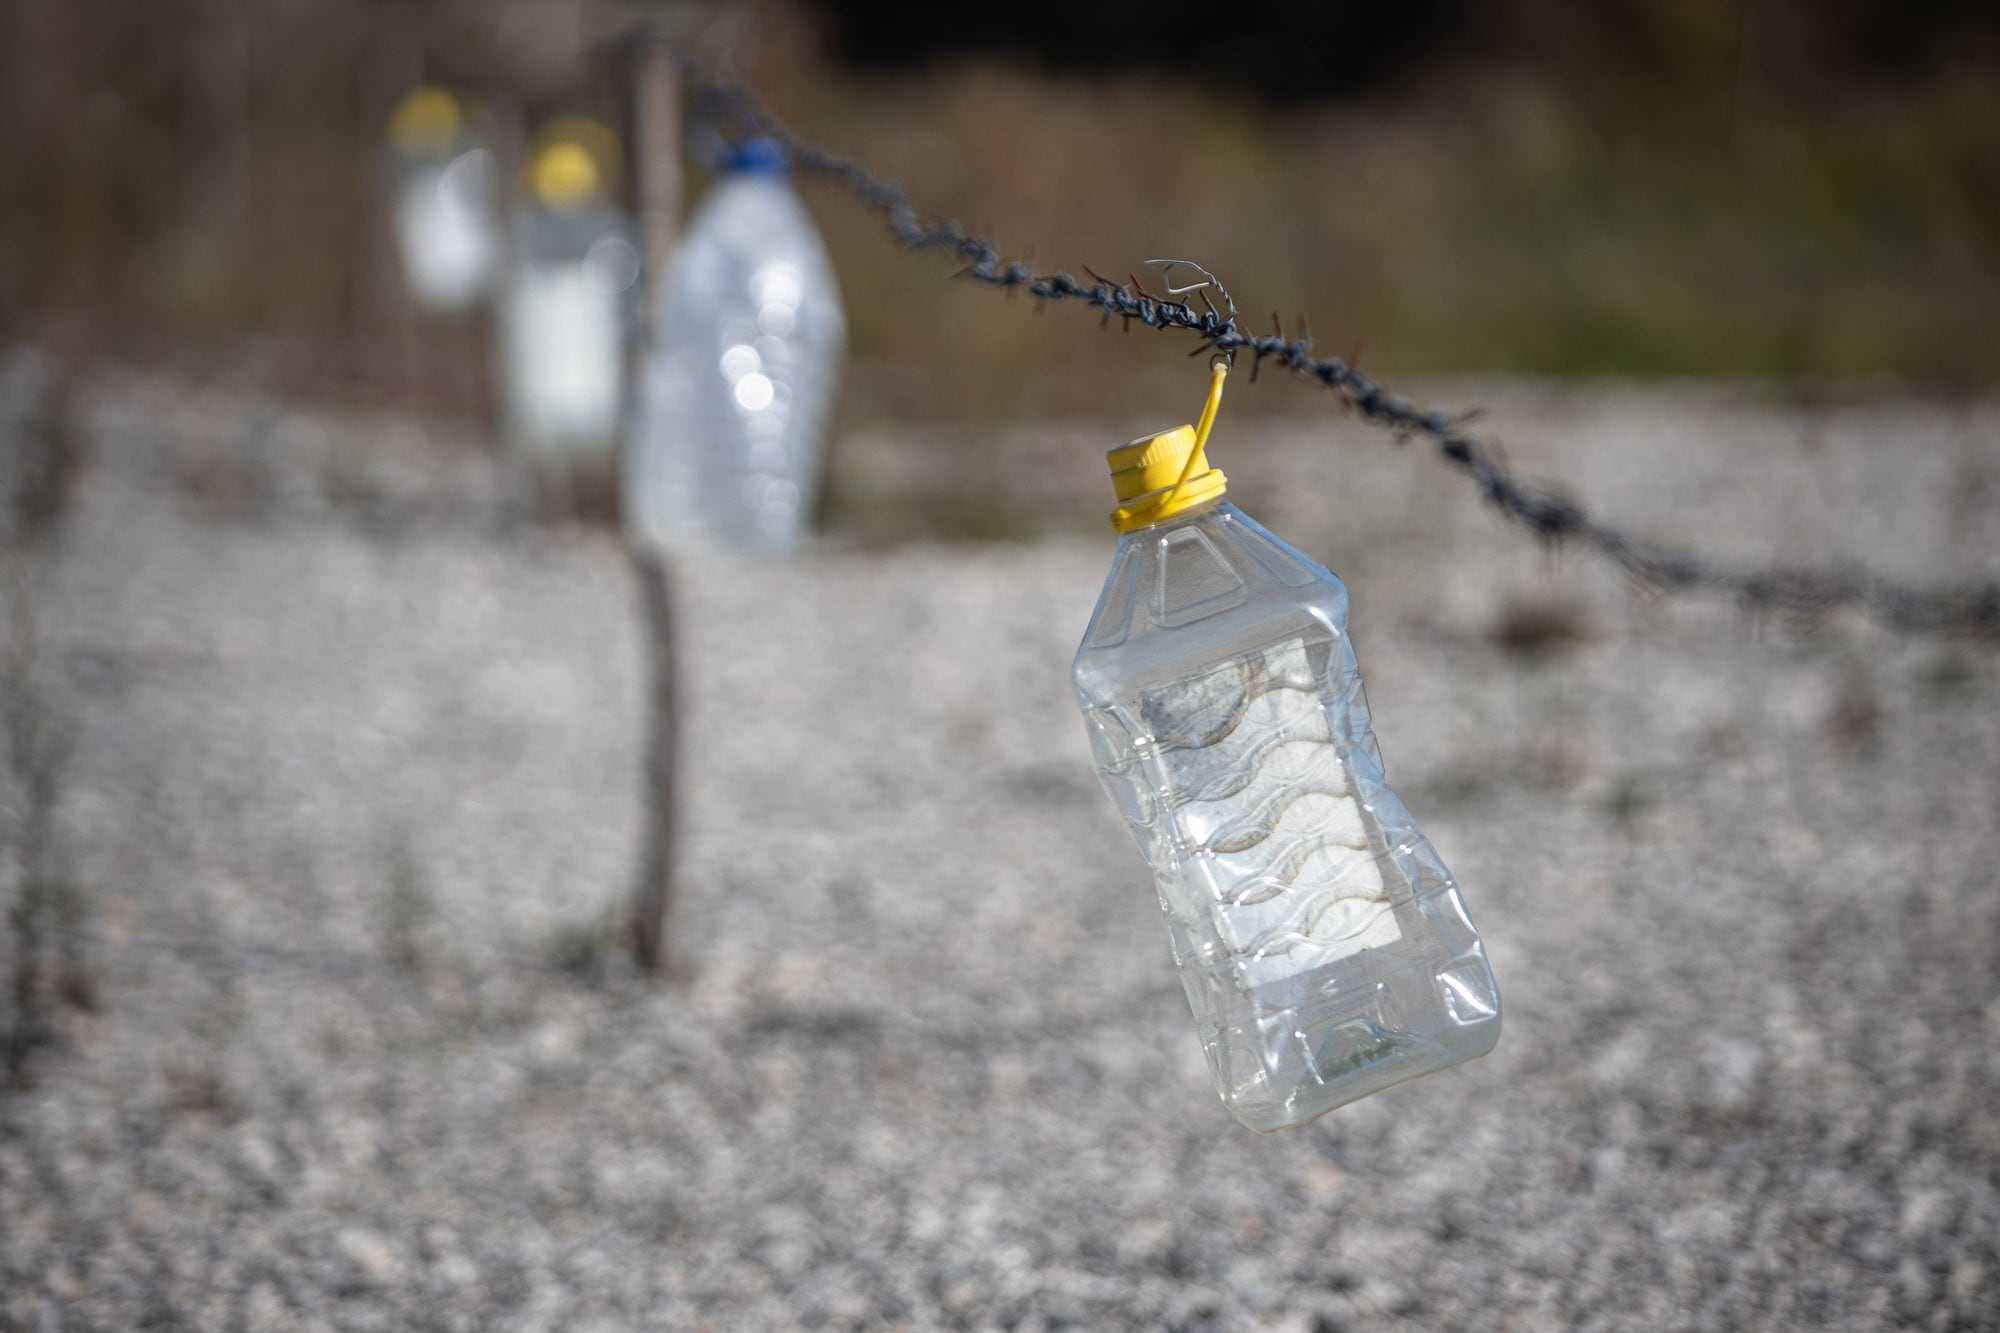 Are these bottles used to mark the barbed wire or do they have another purpose?